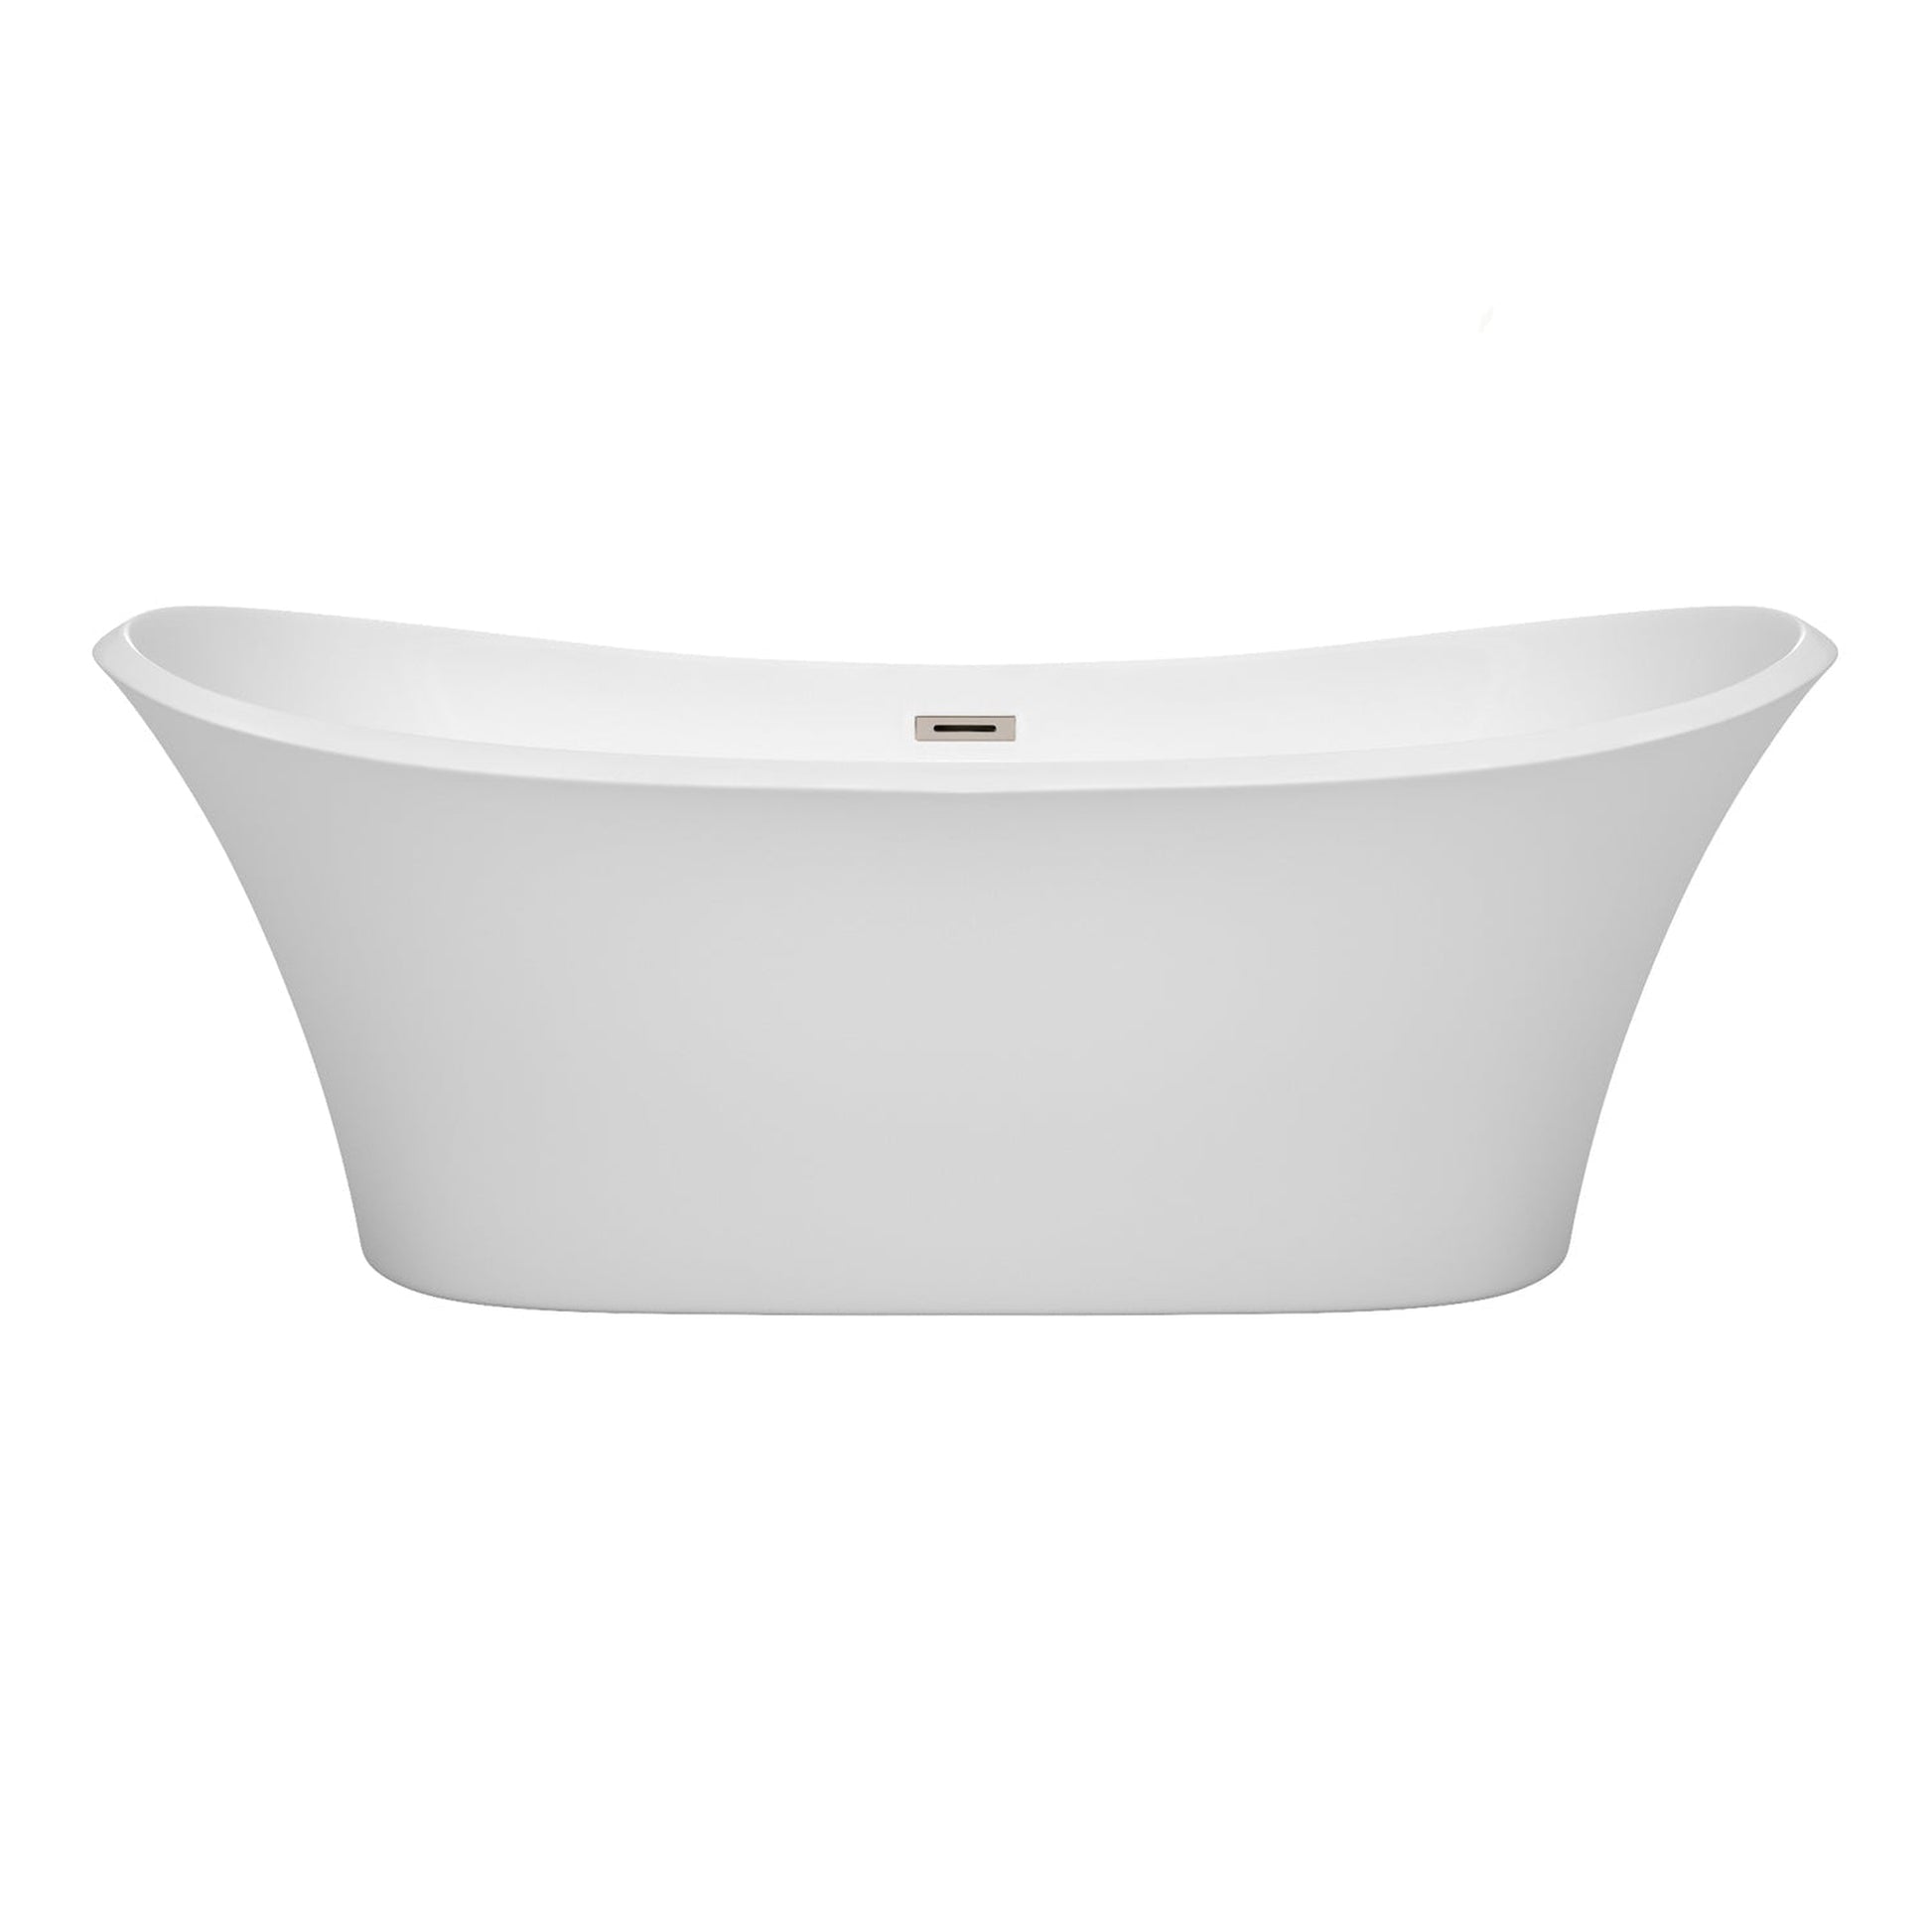 Wyndham Collection Bolera 71" Freestanding Bathtub in White With Brushed Nickel Drain and Overflow Trim